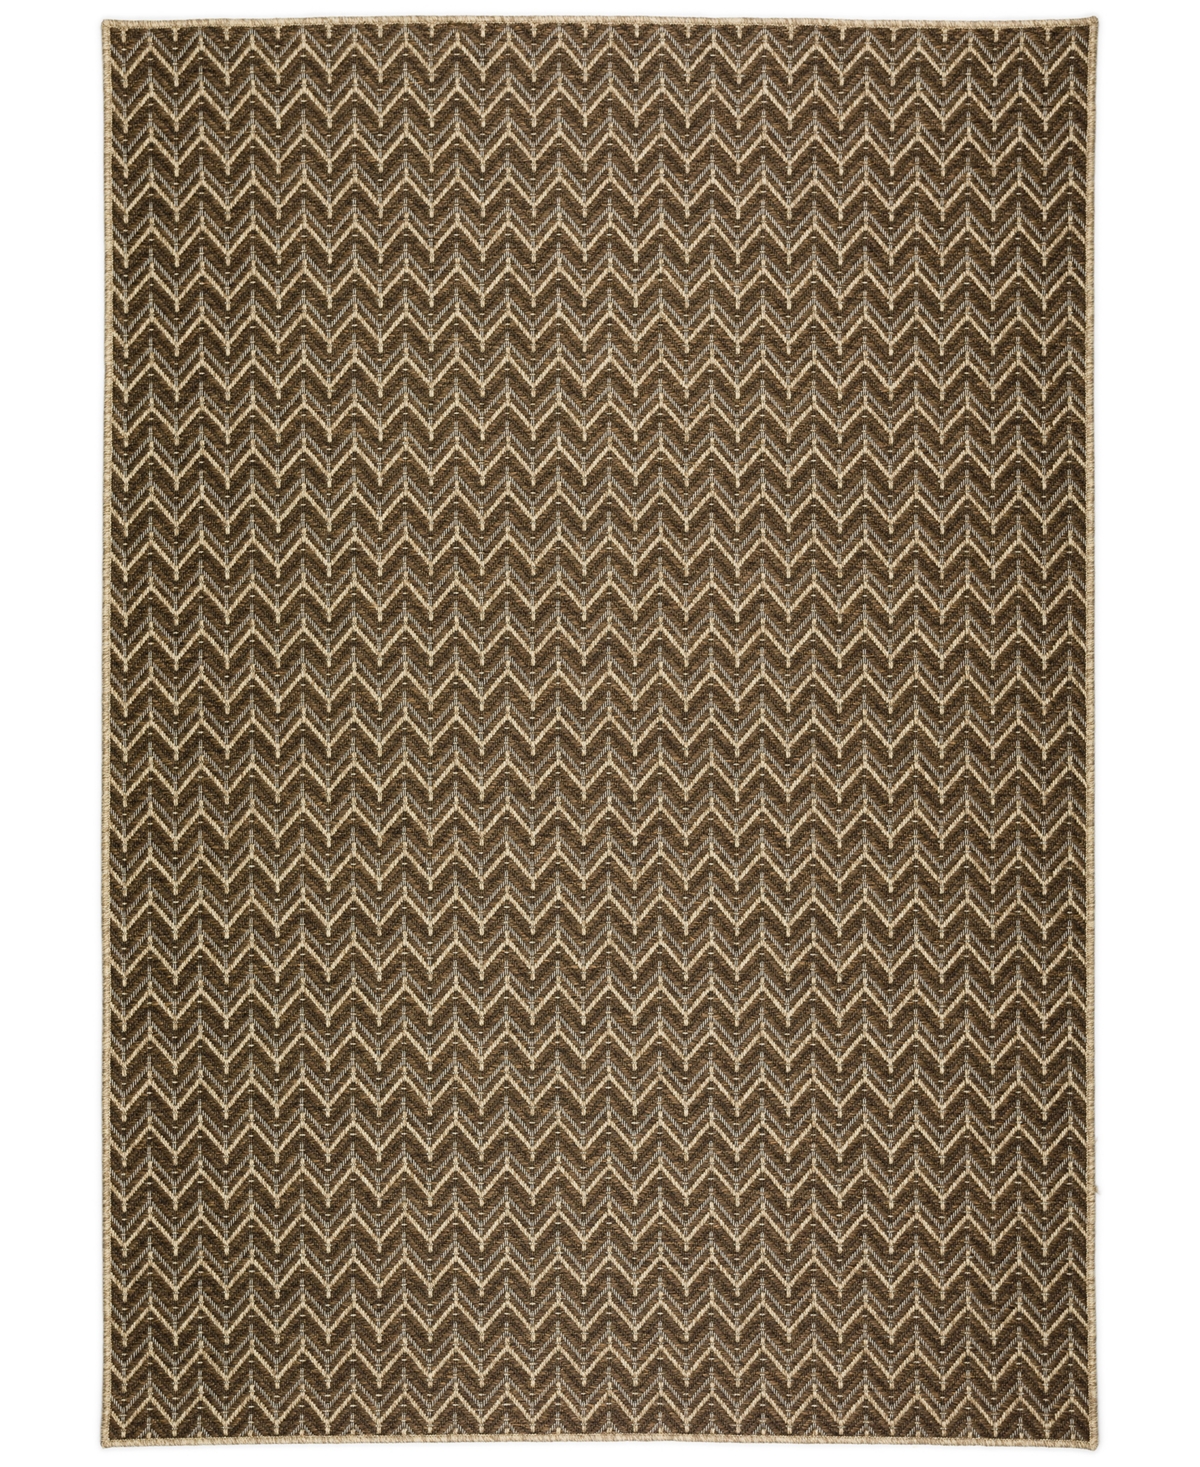 D Style Nusa Outdoor Nsa1 12' X 15' Area Rug In Chocolate